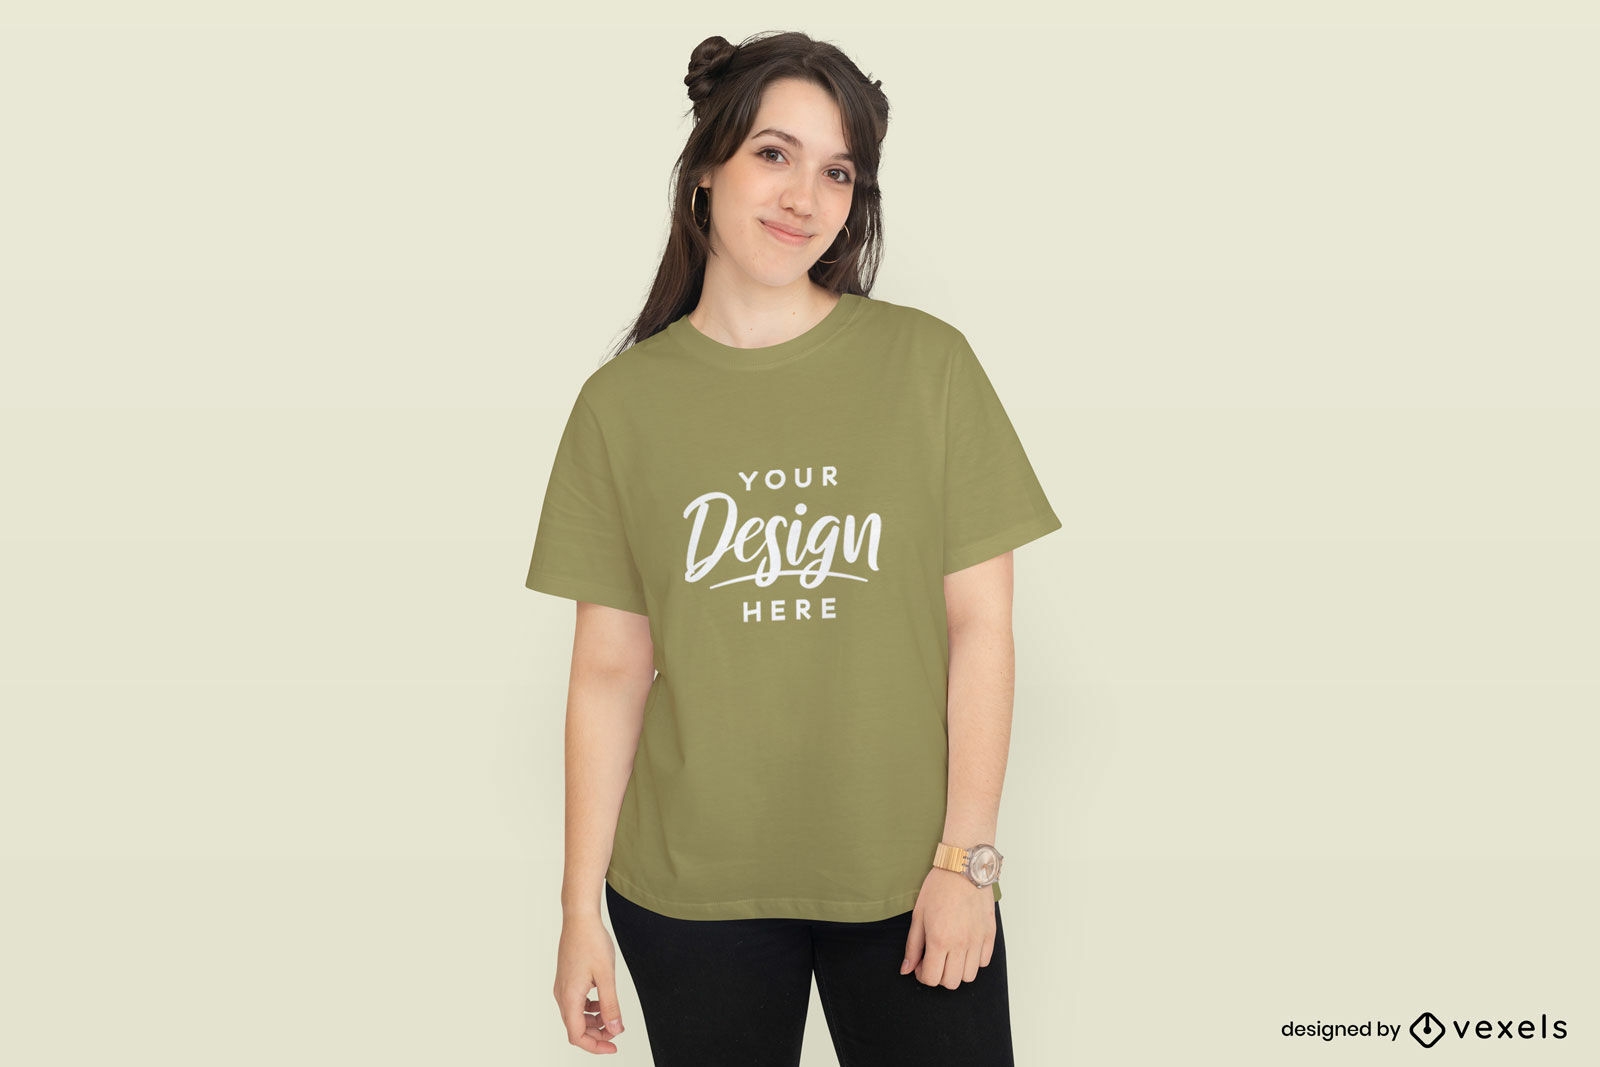 Dark haired woman in jeans t-shirt mockup